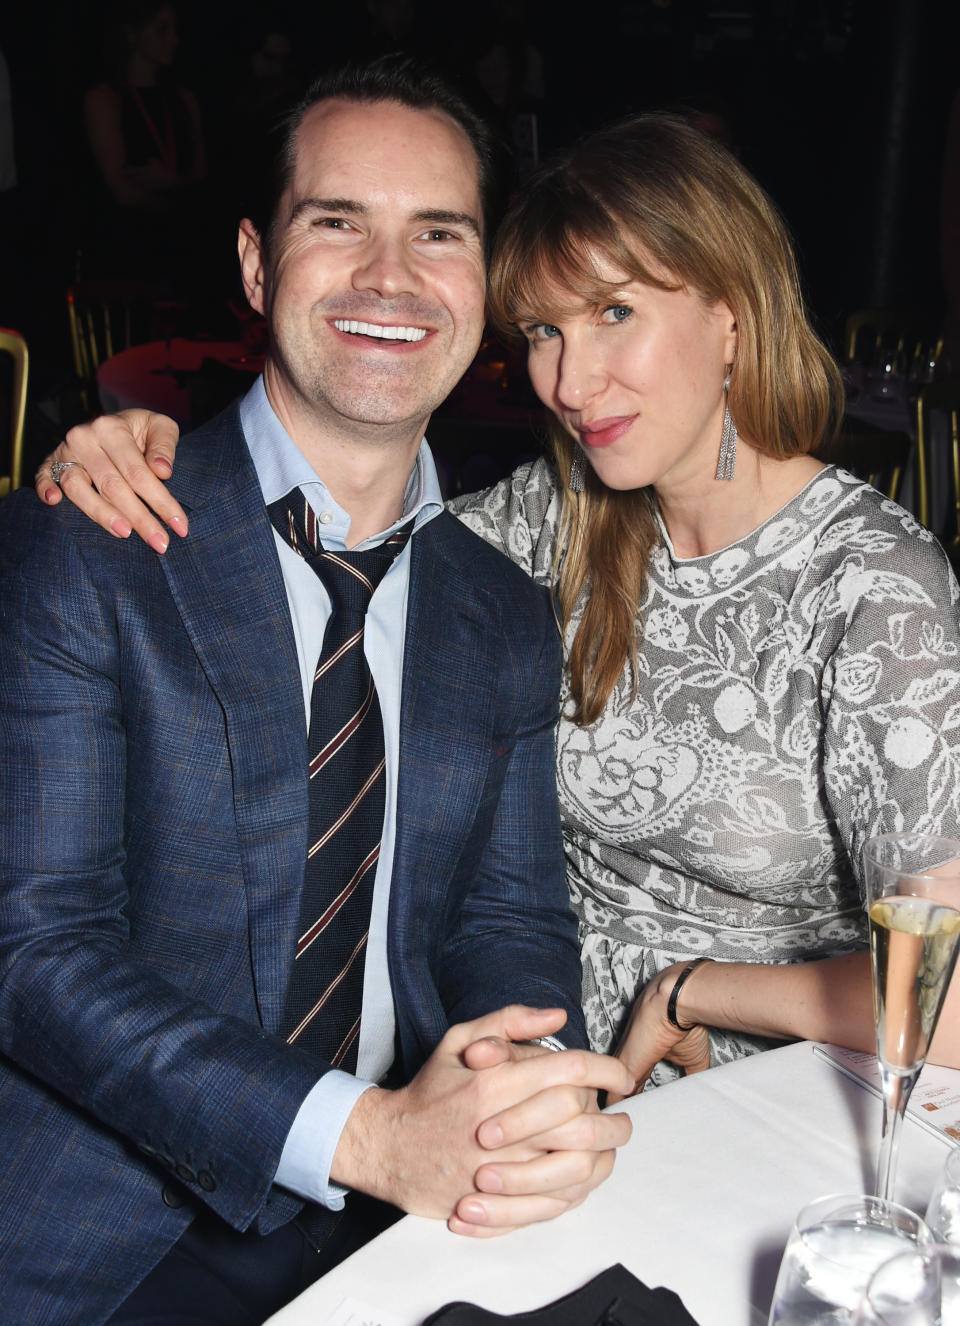 LONDON, ENGLAND - MARCH 16:  Jimmy Carr (L) and Karoline Copping attend the Roundhouse Gala at The Roundhouse on March 16, 2017 in London, England.  (Photo by David M. Benett/Dave Benett/Getty Images for Roundhouse)